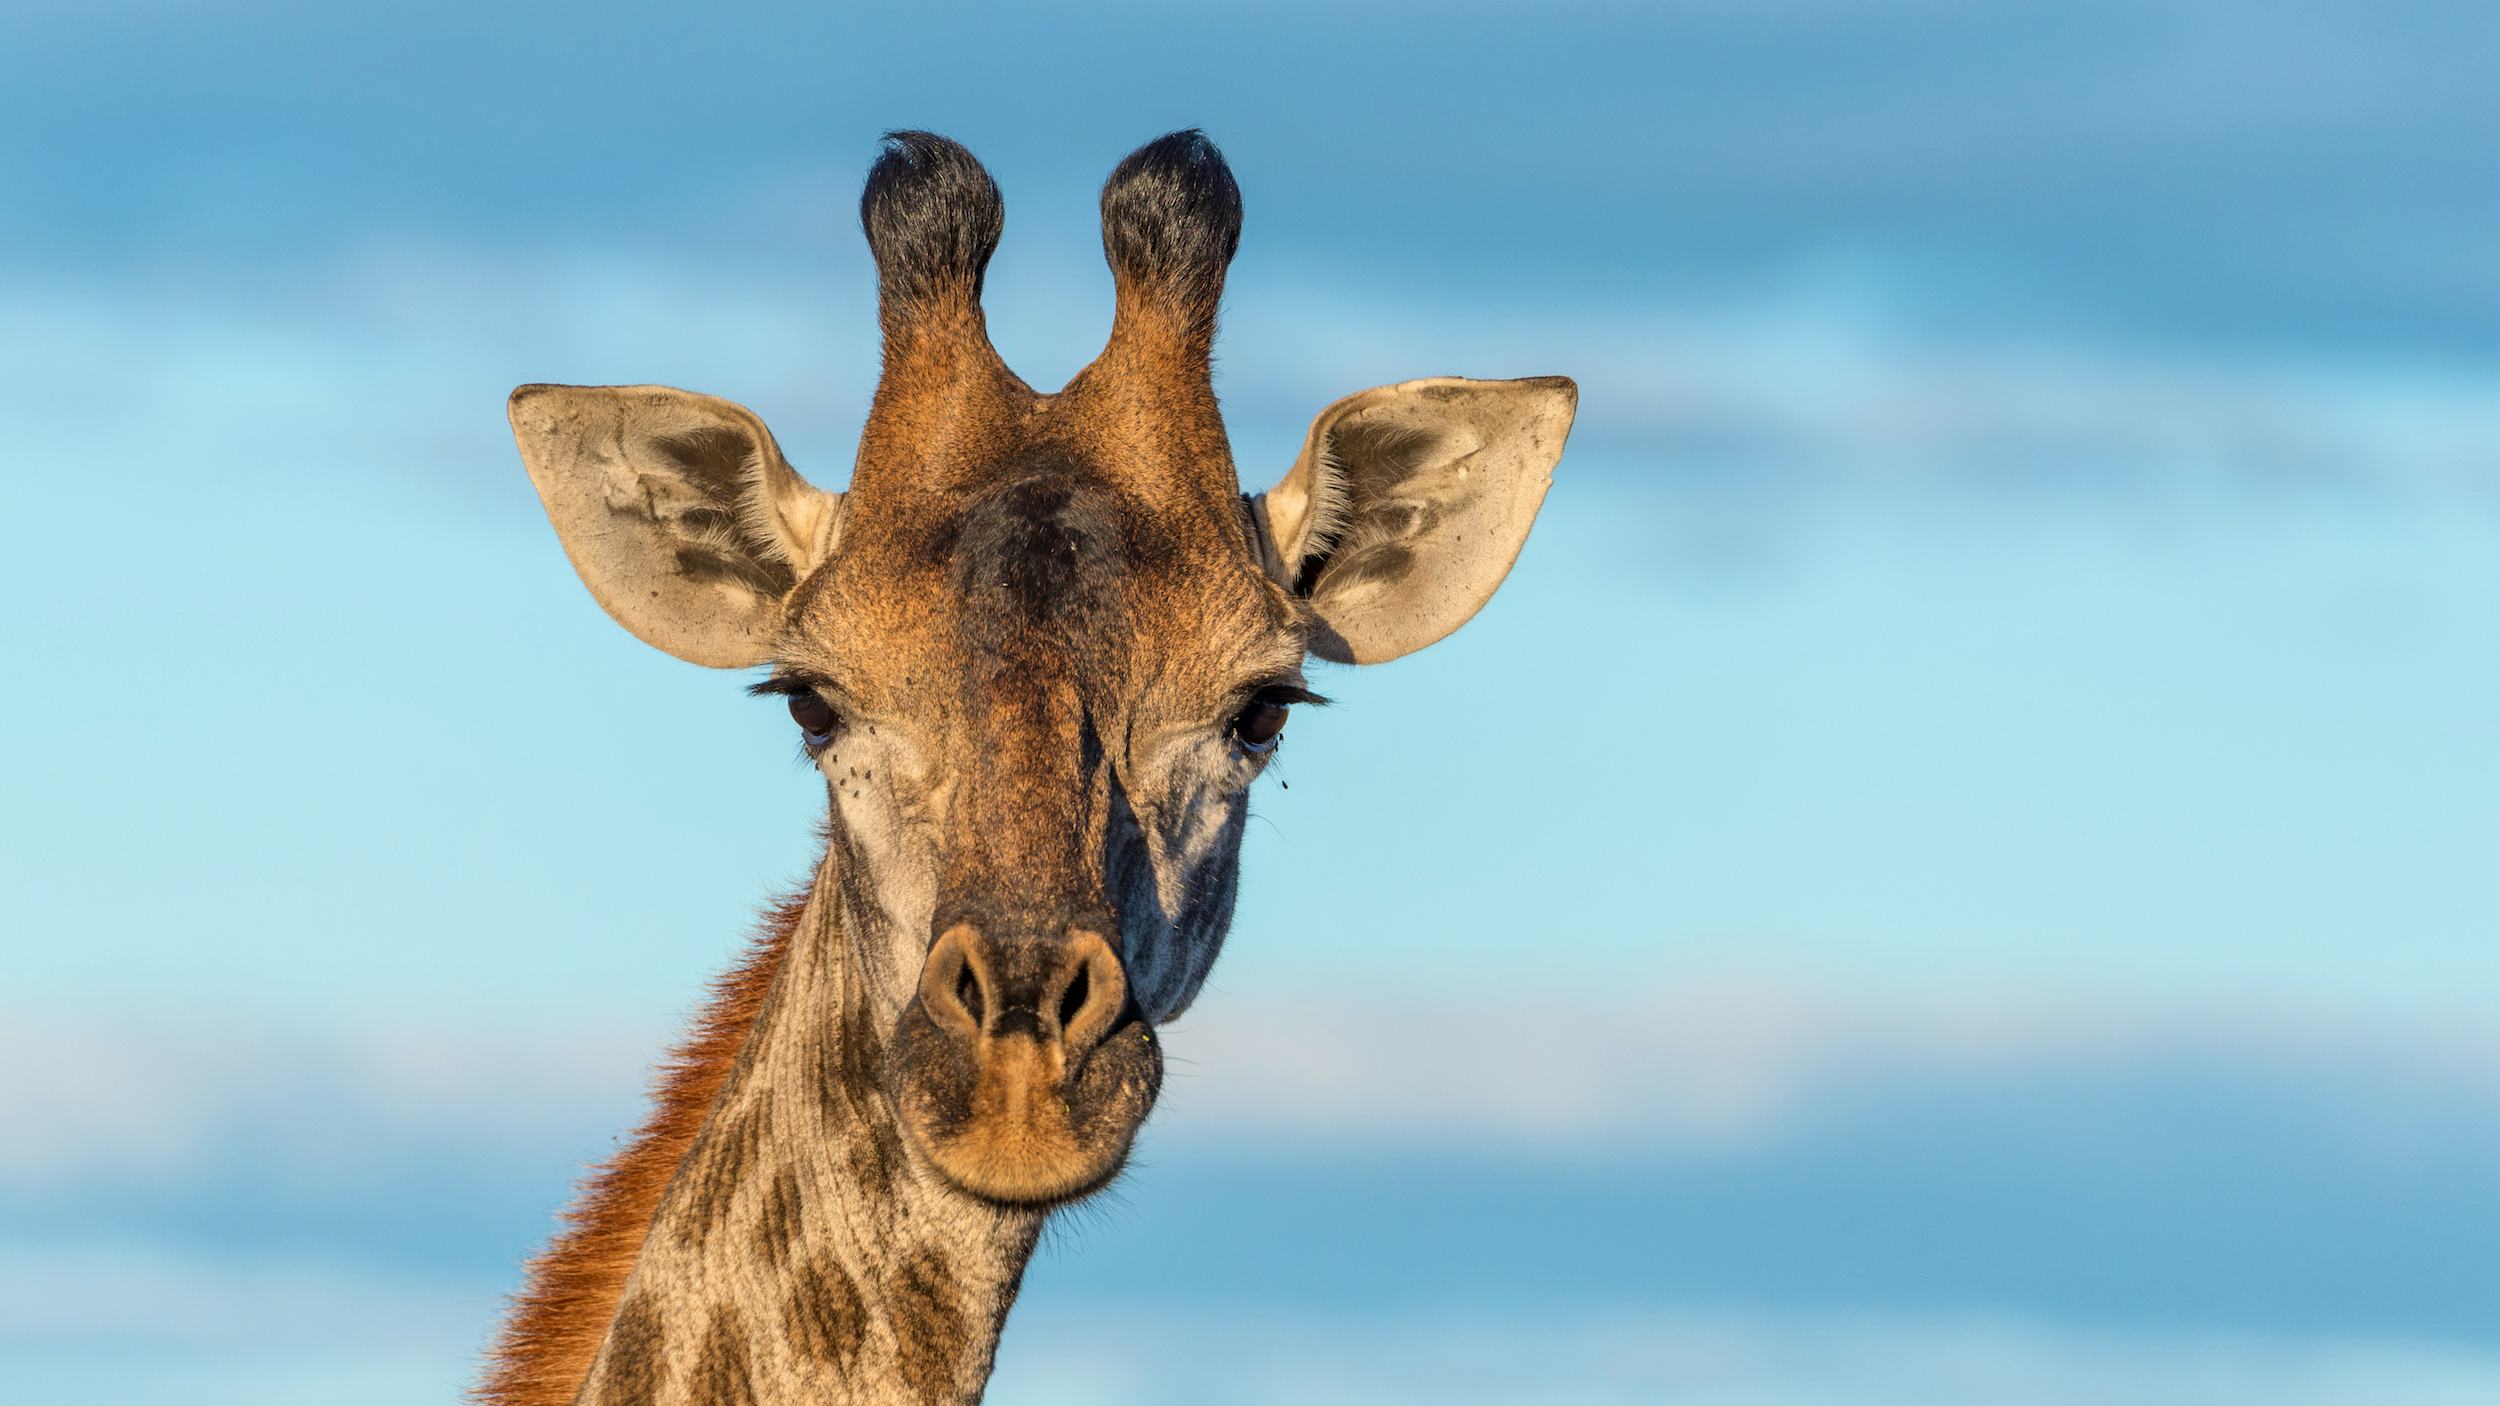 Newsela - Giraffes may be added to the 